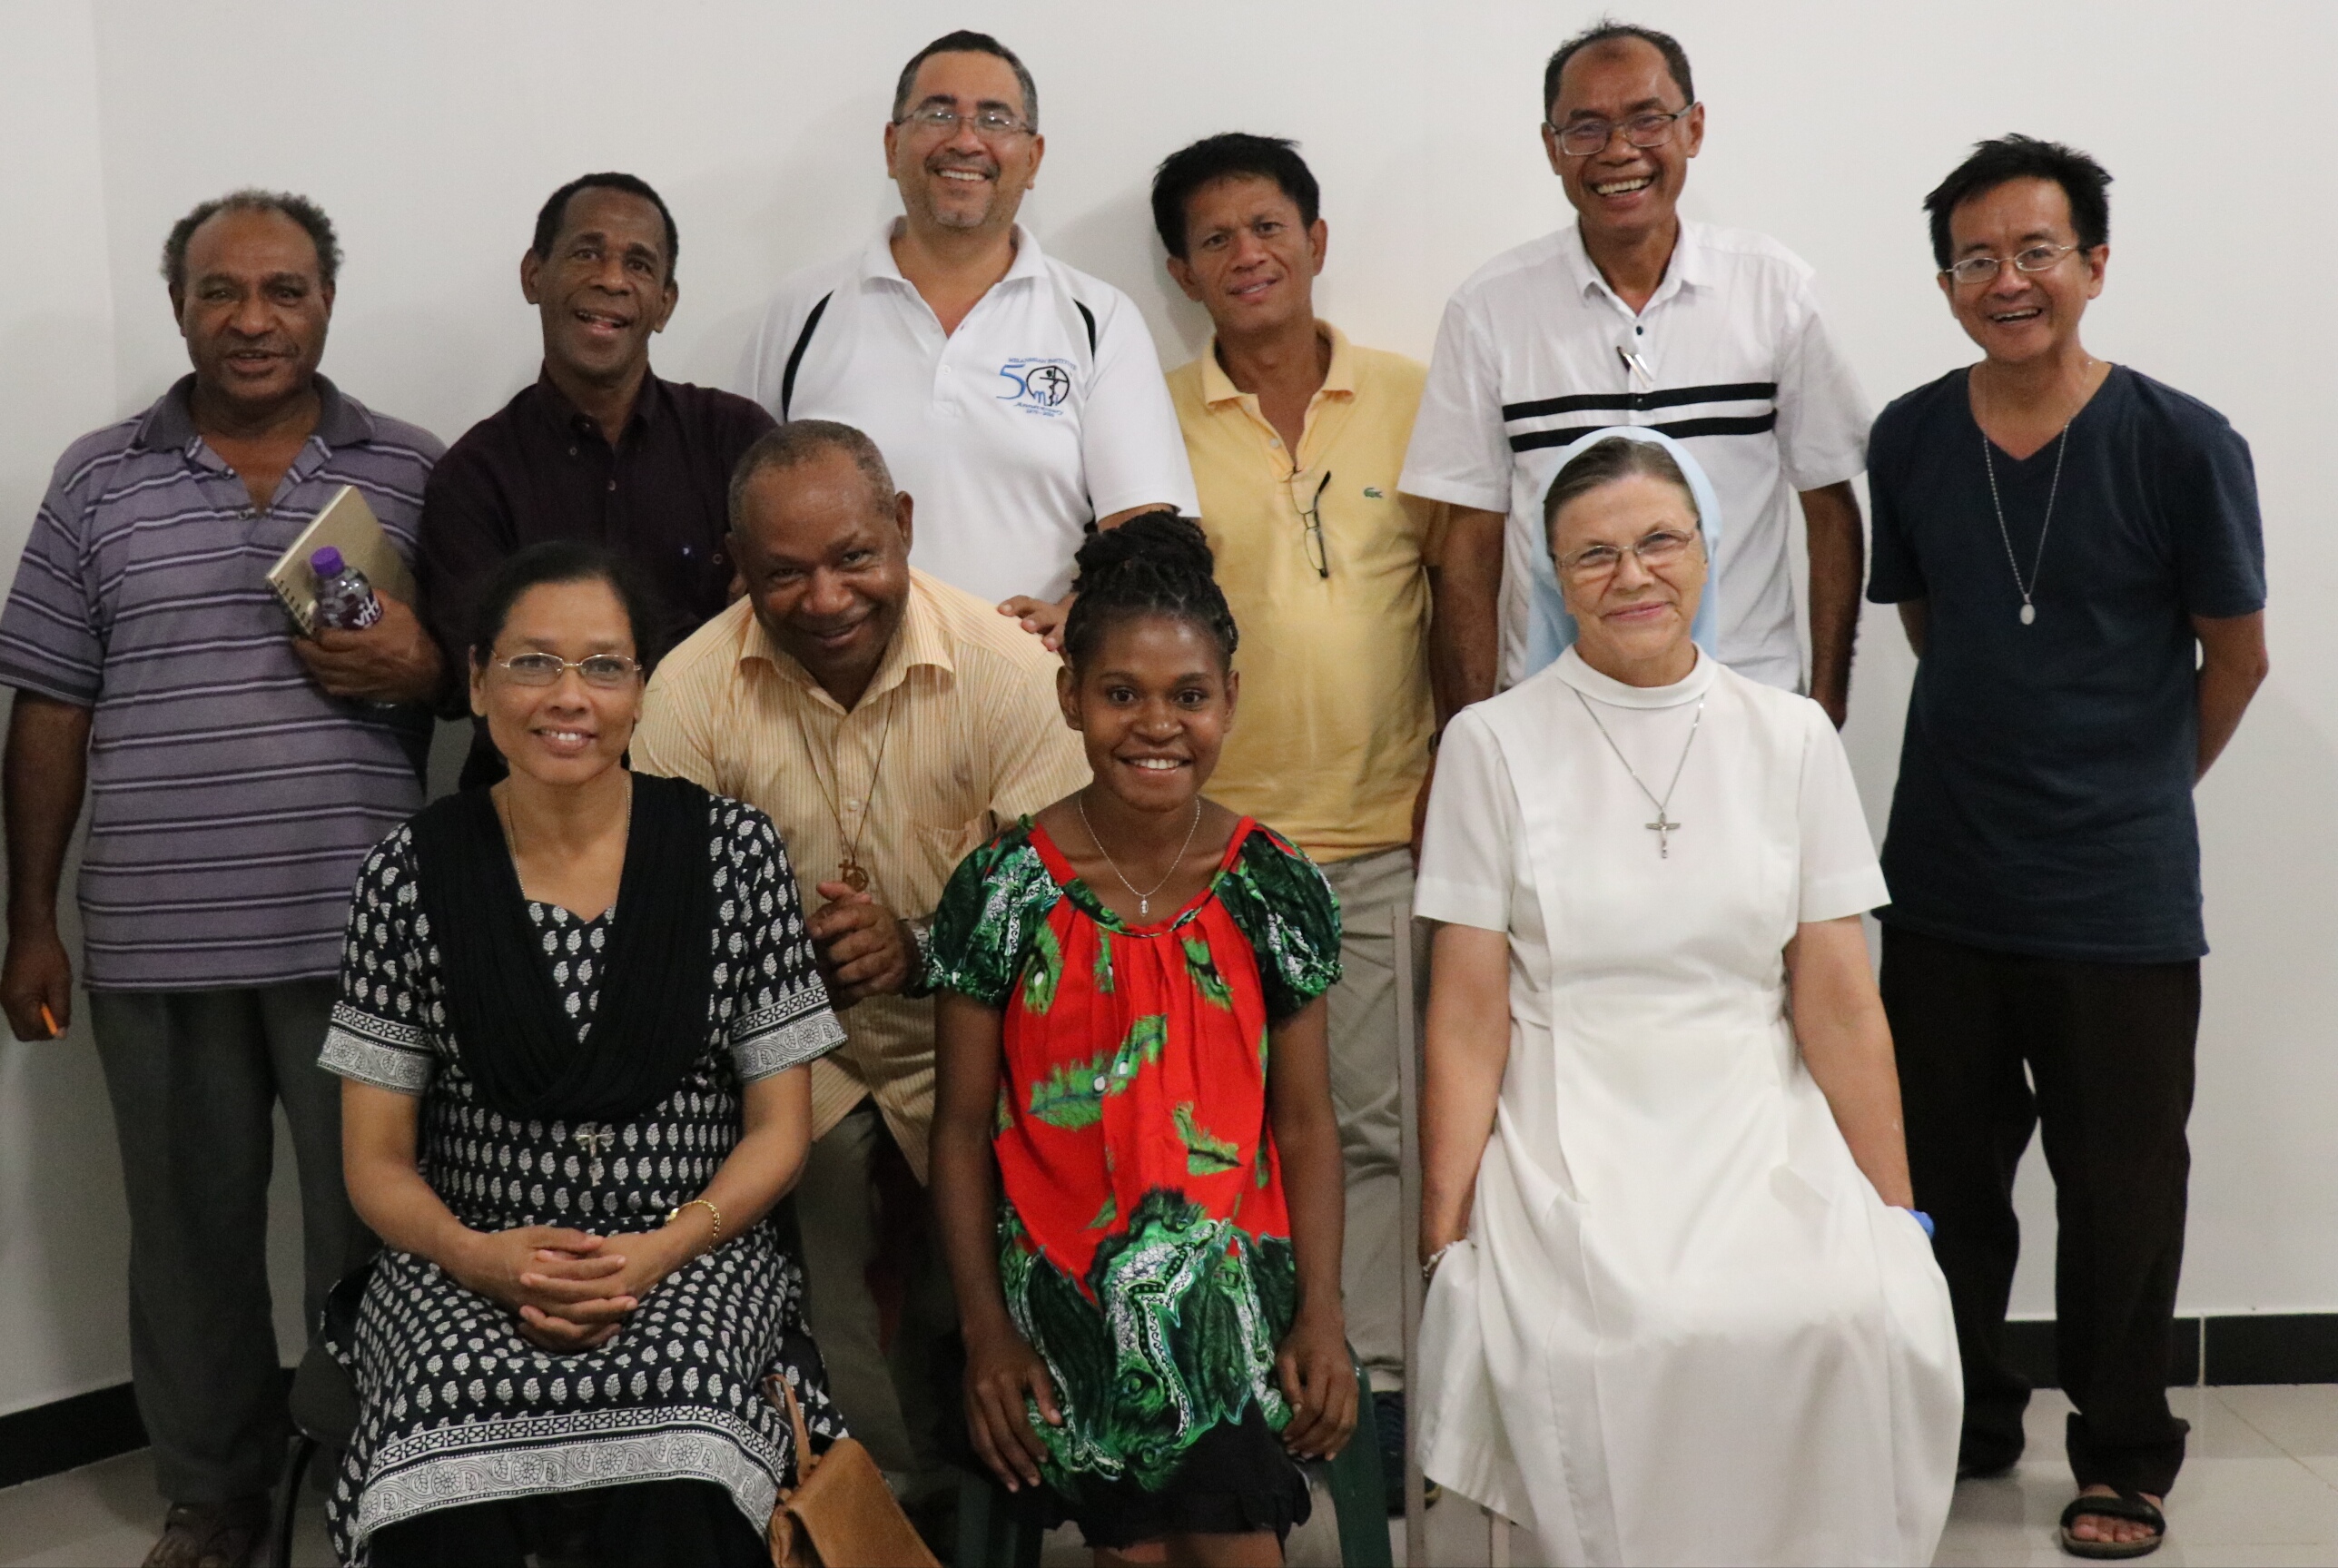 images/Galleries/FASS-SRS/Melanesian Institute Team with SRS.jpg